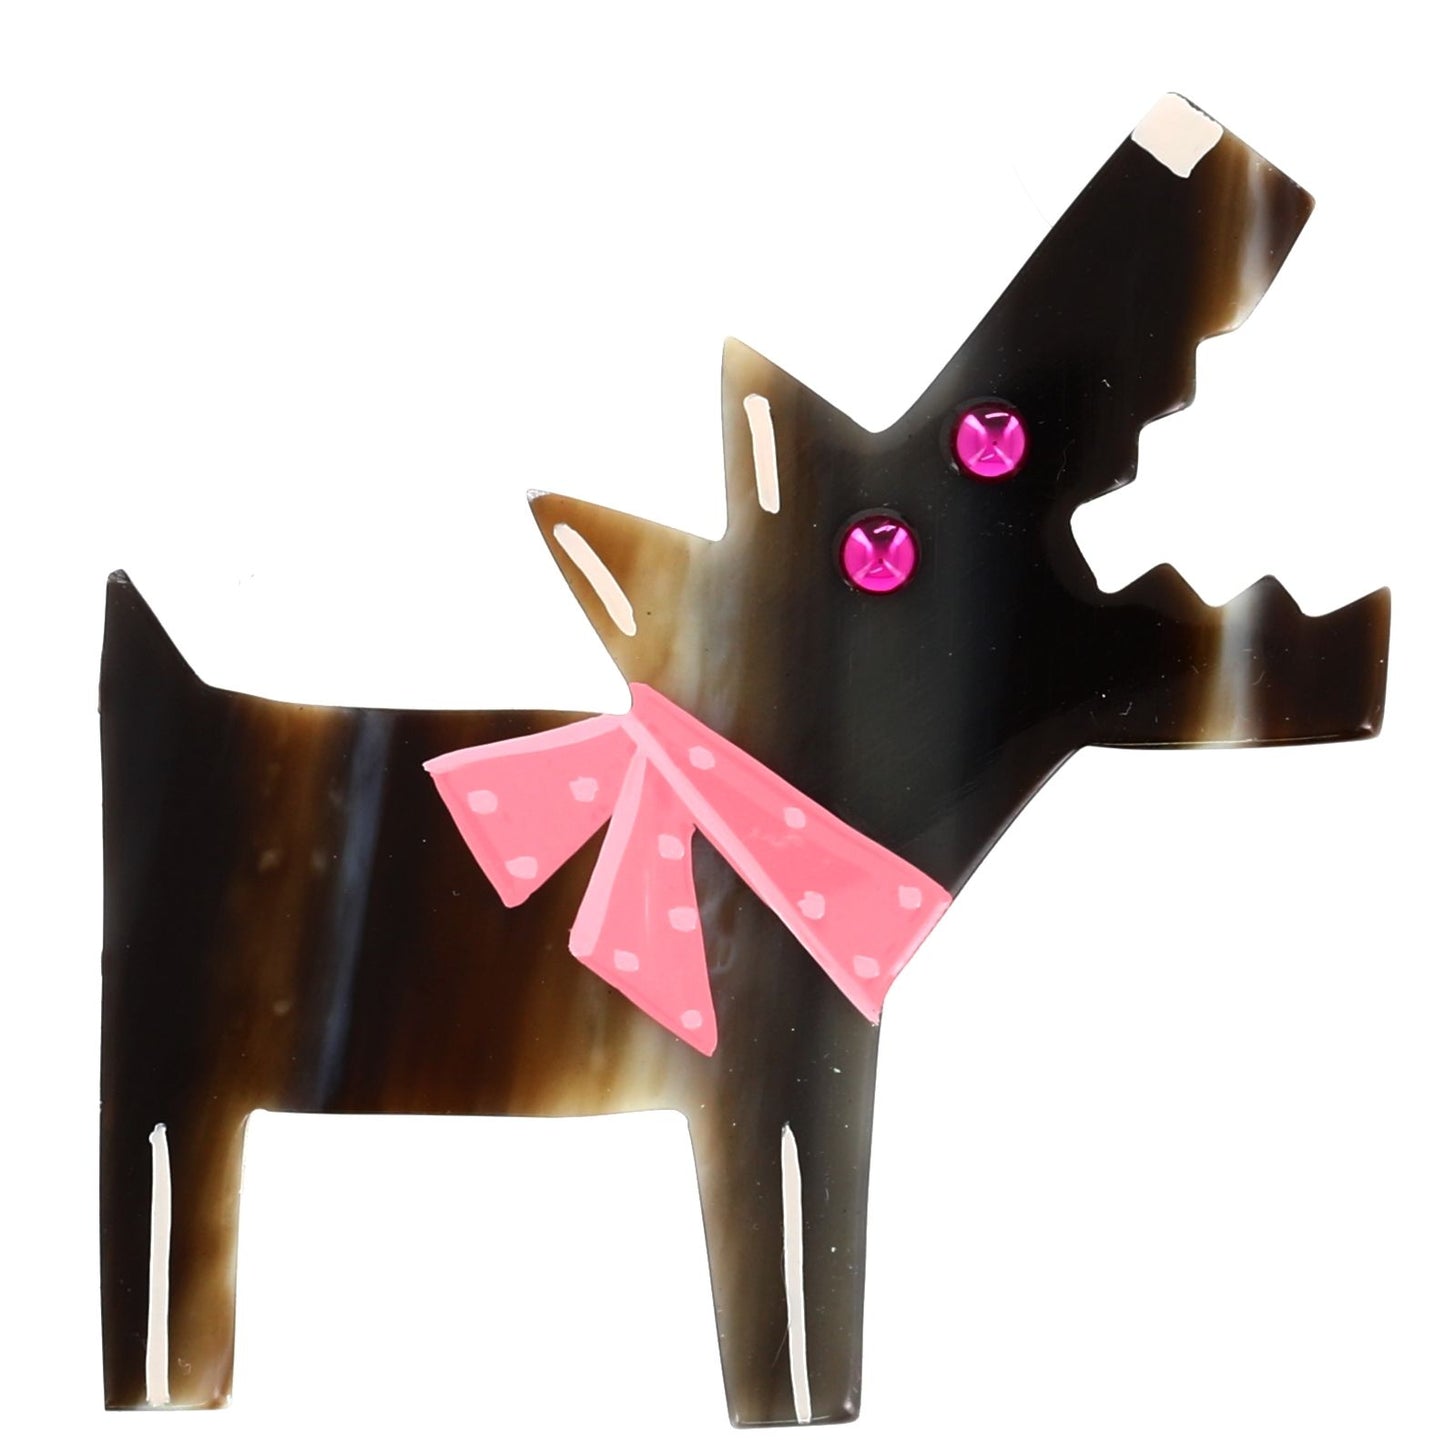 Beige and Pink Barki the Pirate's Dog Brooch in galalith